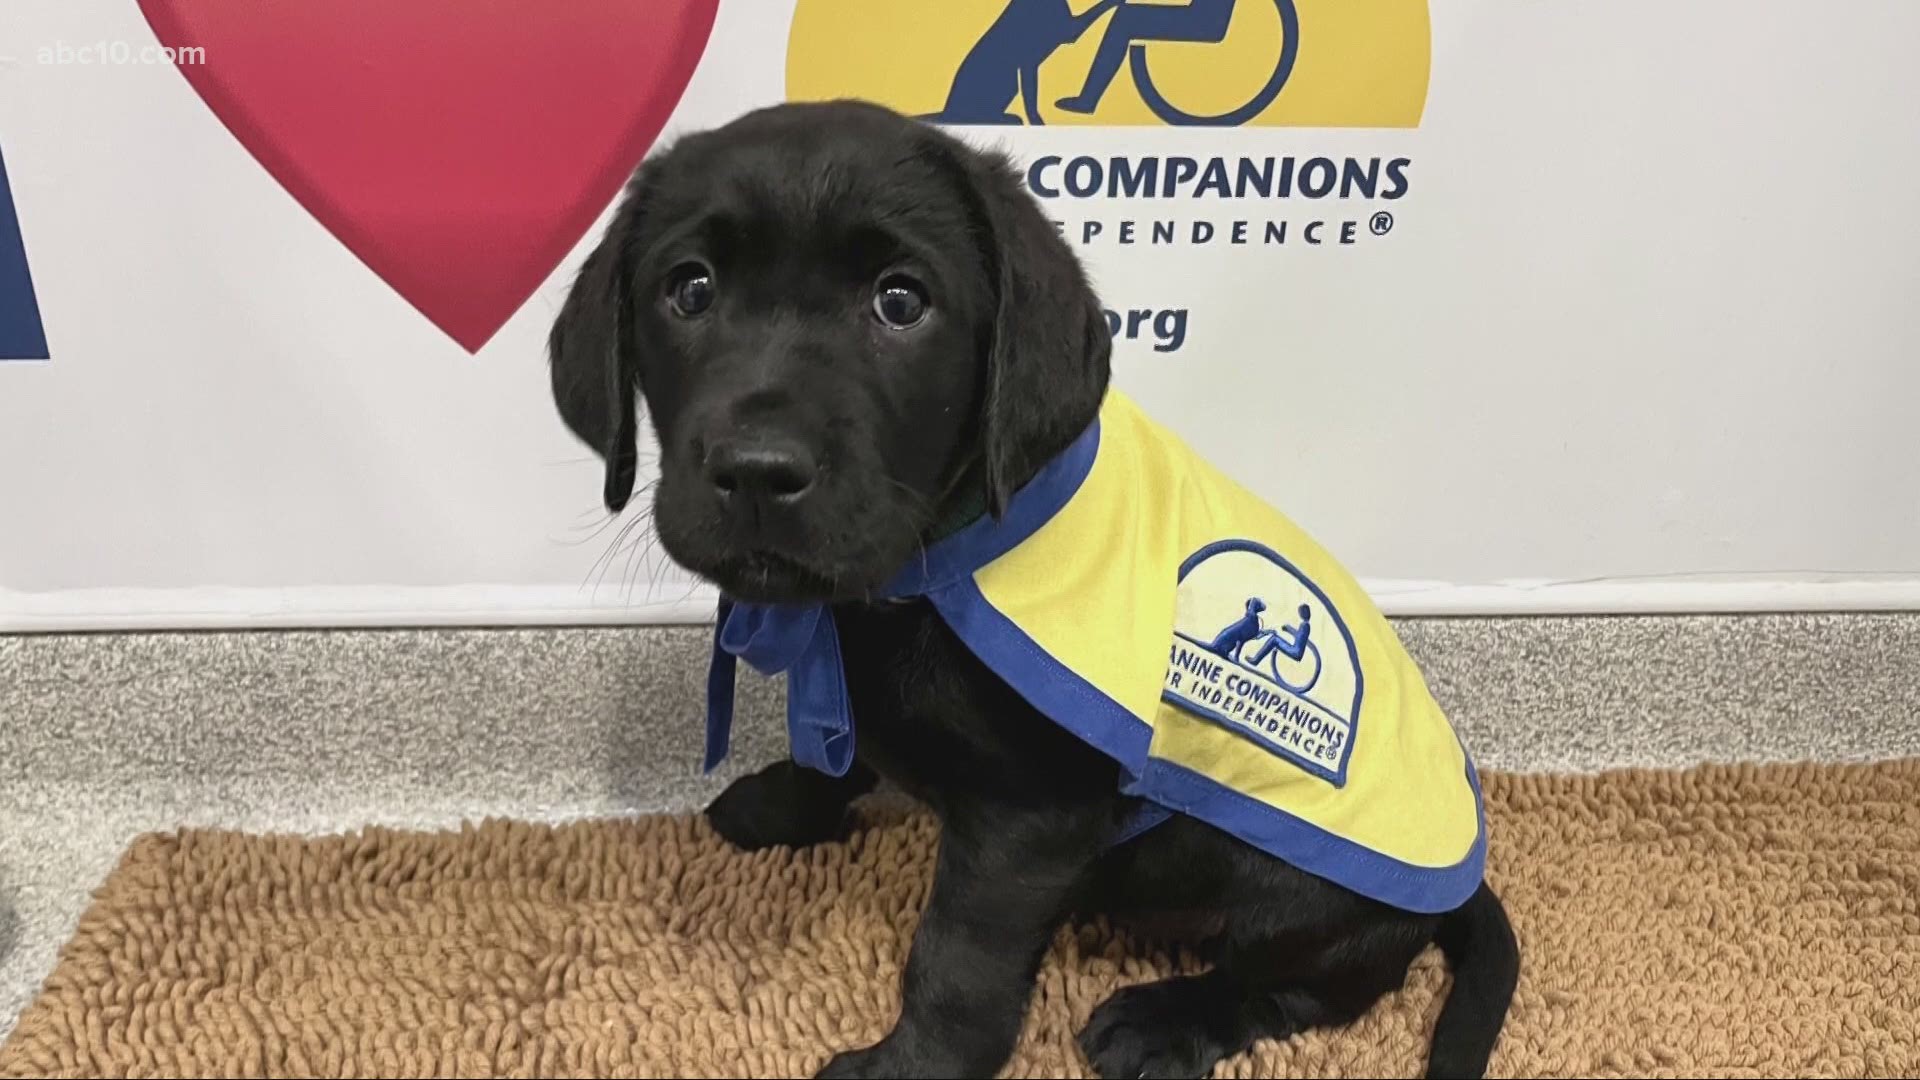 A New service dog is named O'Sully after fallen Sacramento Police Officer Tara O'Sullivan. A boy helped raise funds for the dog.